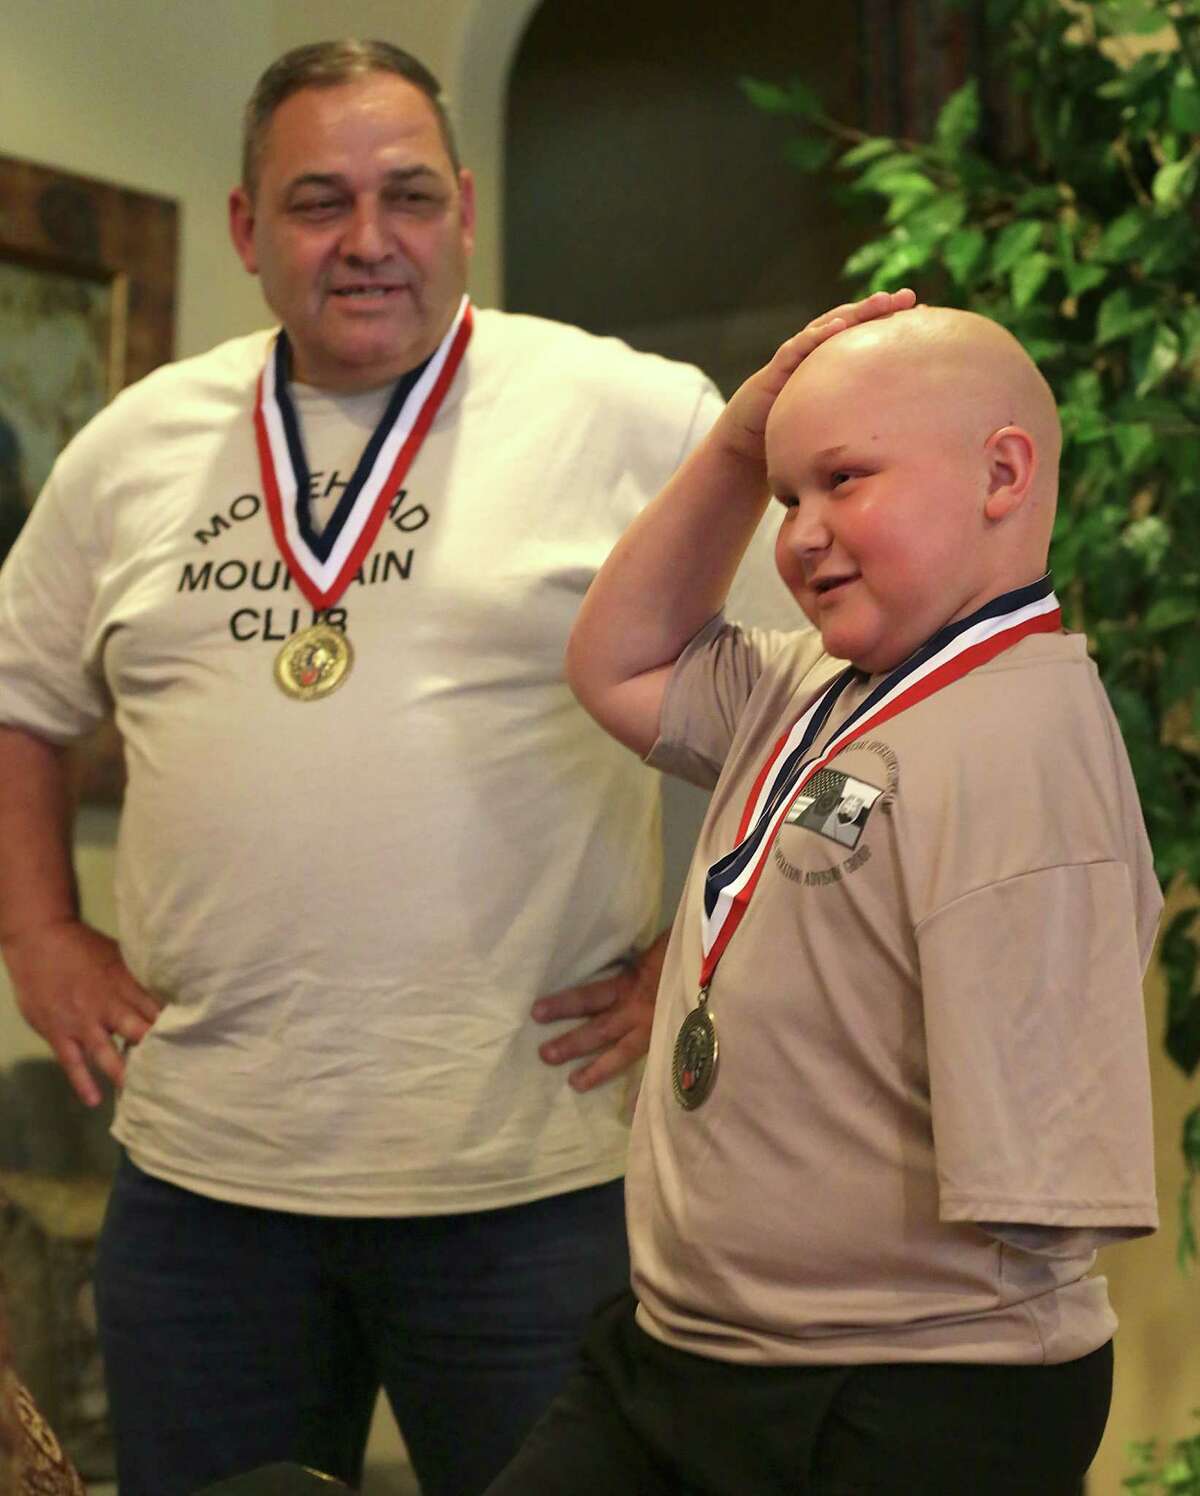 Lt. Col Jerry Touchet listens to his inspirational young friend cancer patient Damon Billeck, 12, as they finally got a surprise meeting on Friday, May, 27, 2016, after writing to each other and sending gifts over the past two years.